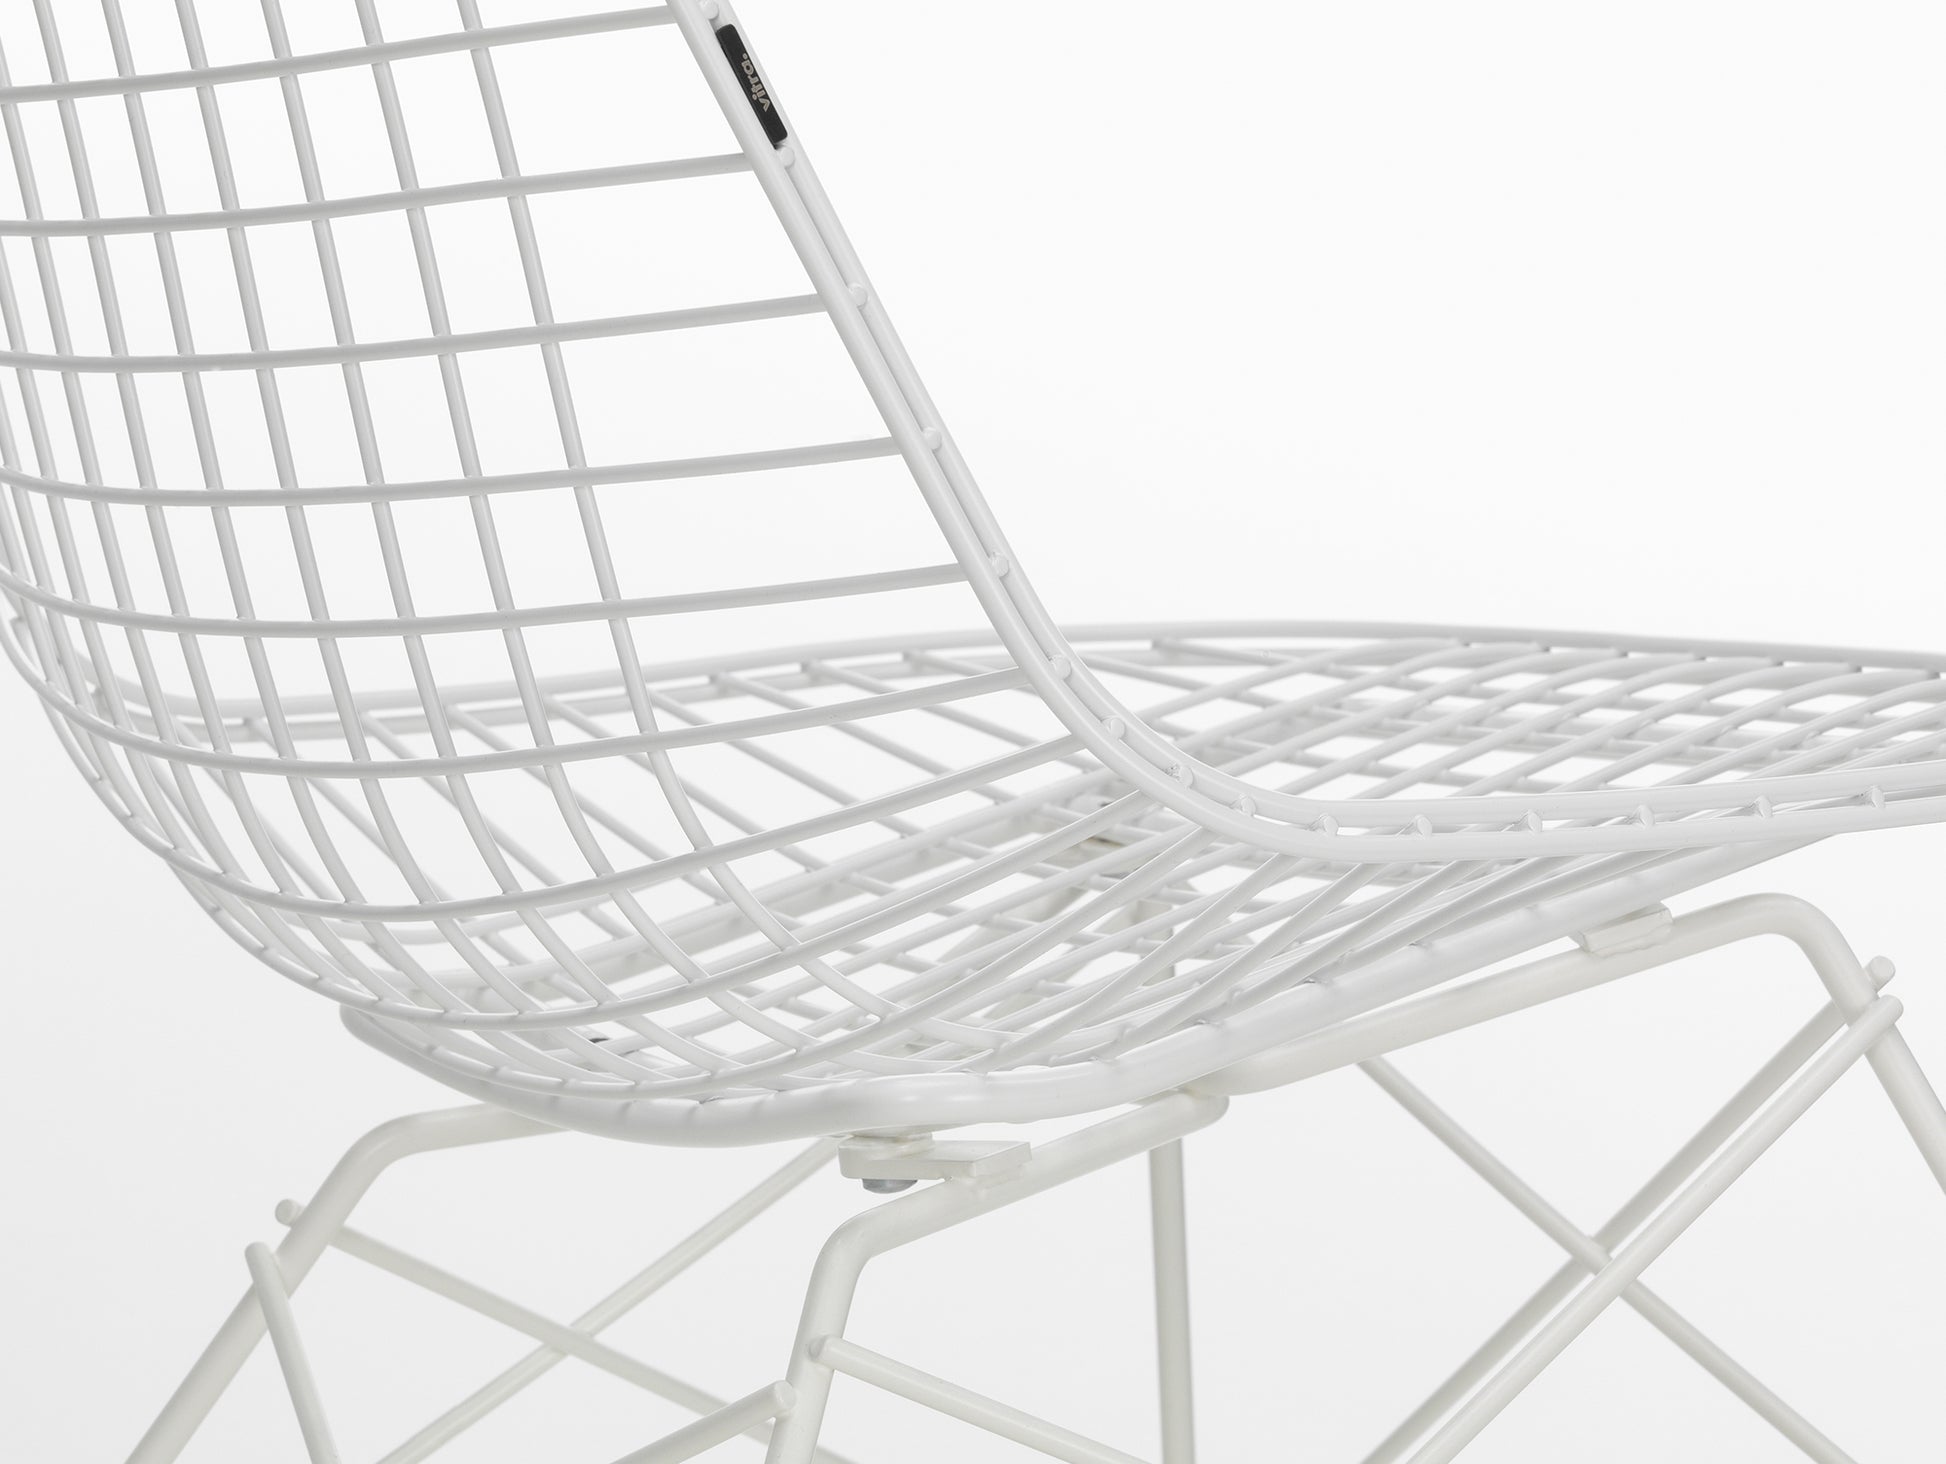 Eames LKR Wire Chair by Vitra - White Powder-Coated Steel